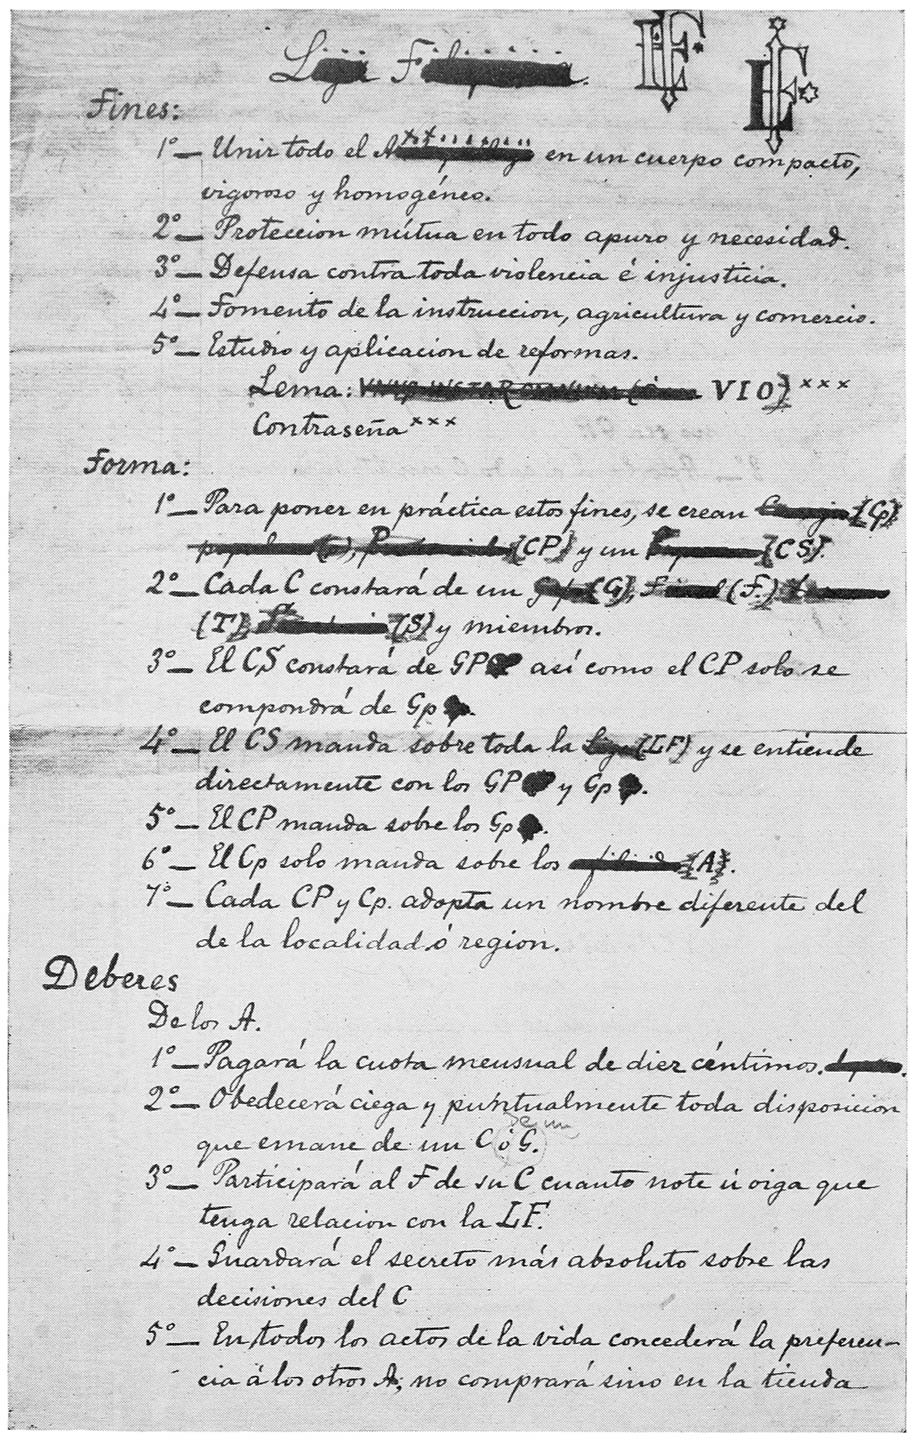 THE OUTLINE OF THE CONSTITUTION OF THE “LIGA FILIPINA”